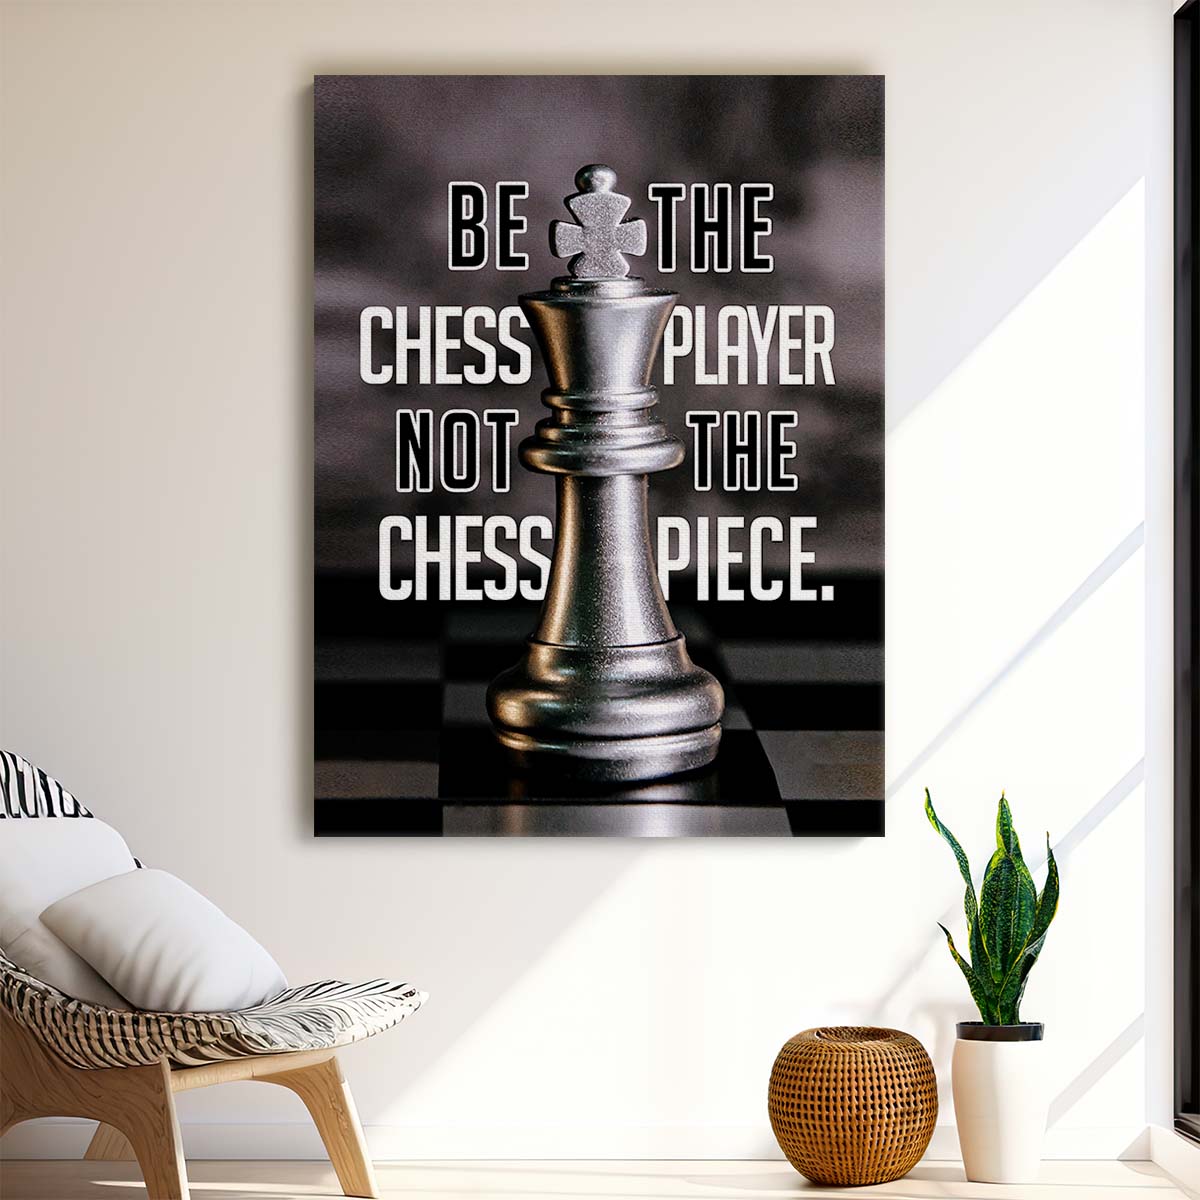 Be The Chess Player Not The Piece Wall Art by Luxuriance Designs. Made in USA.